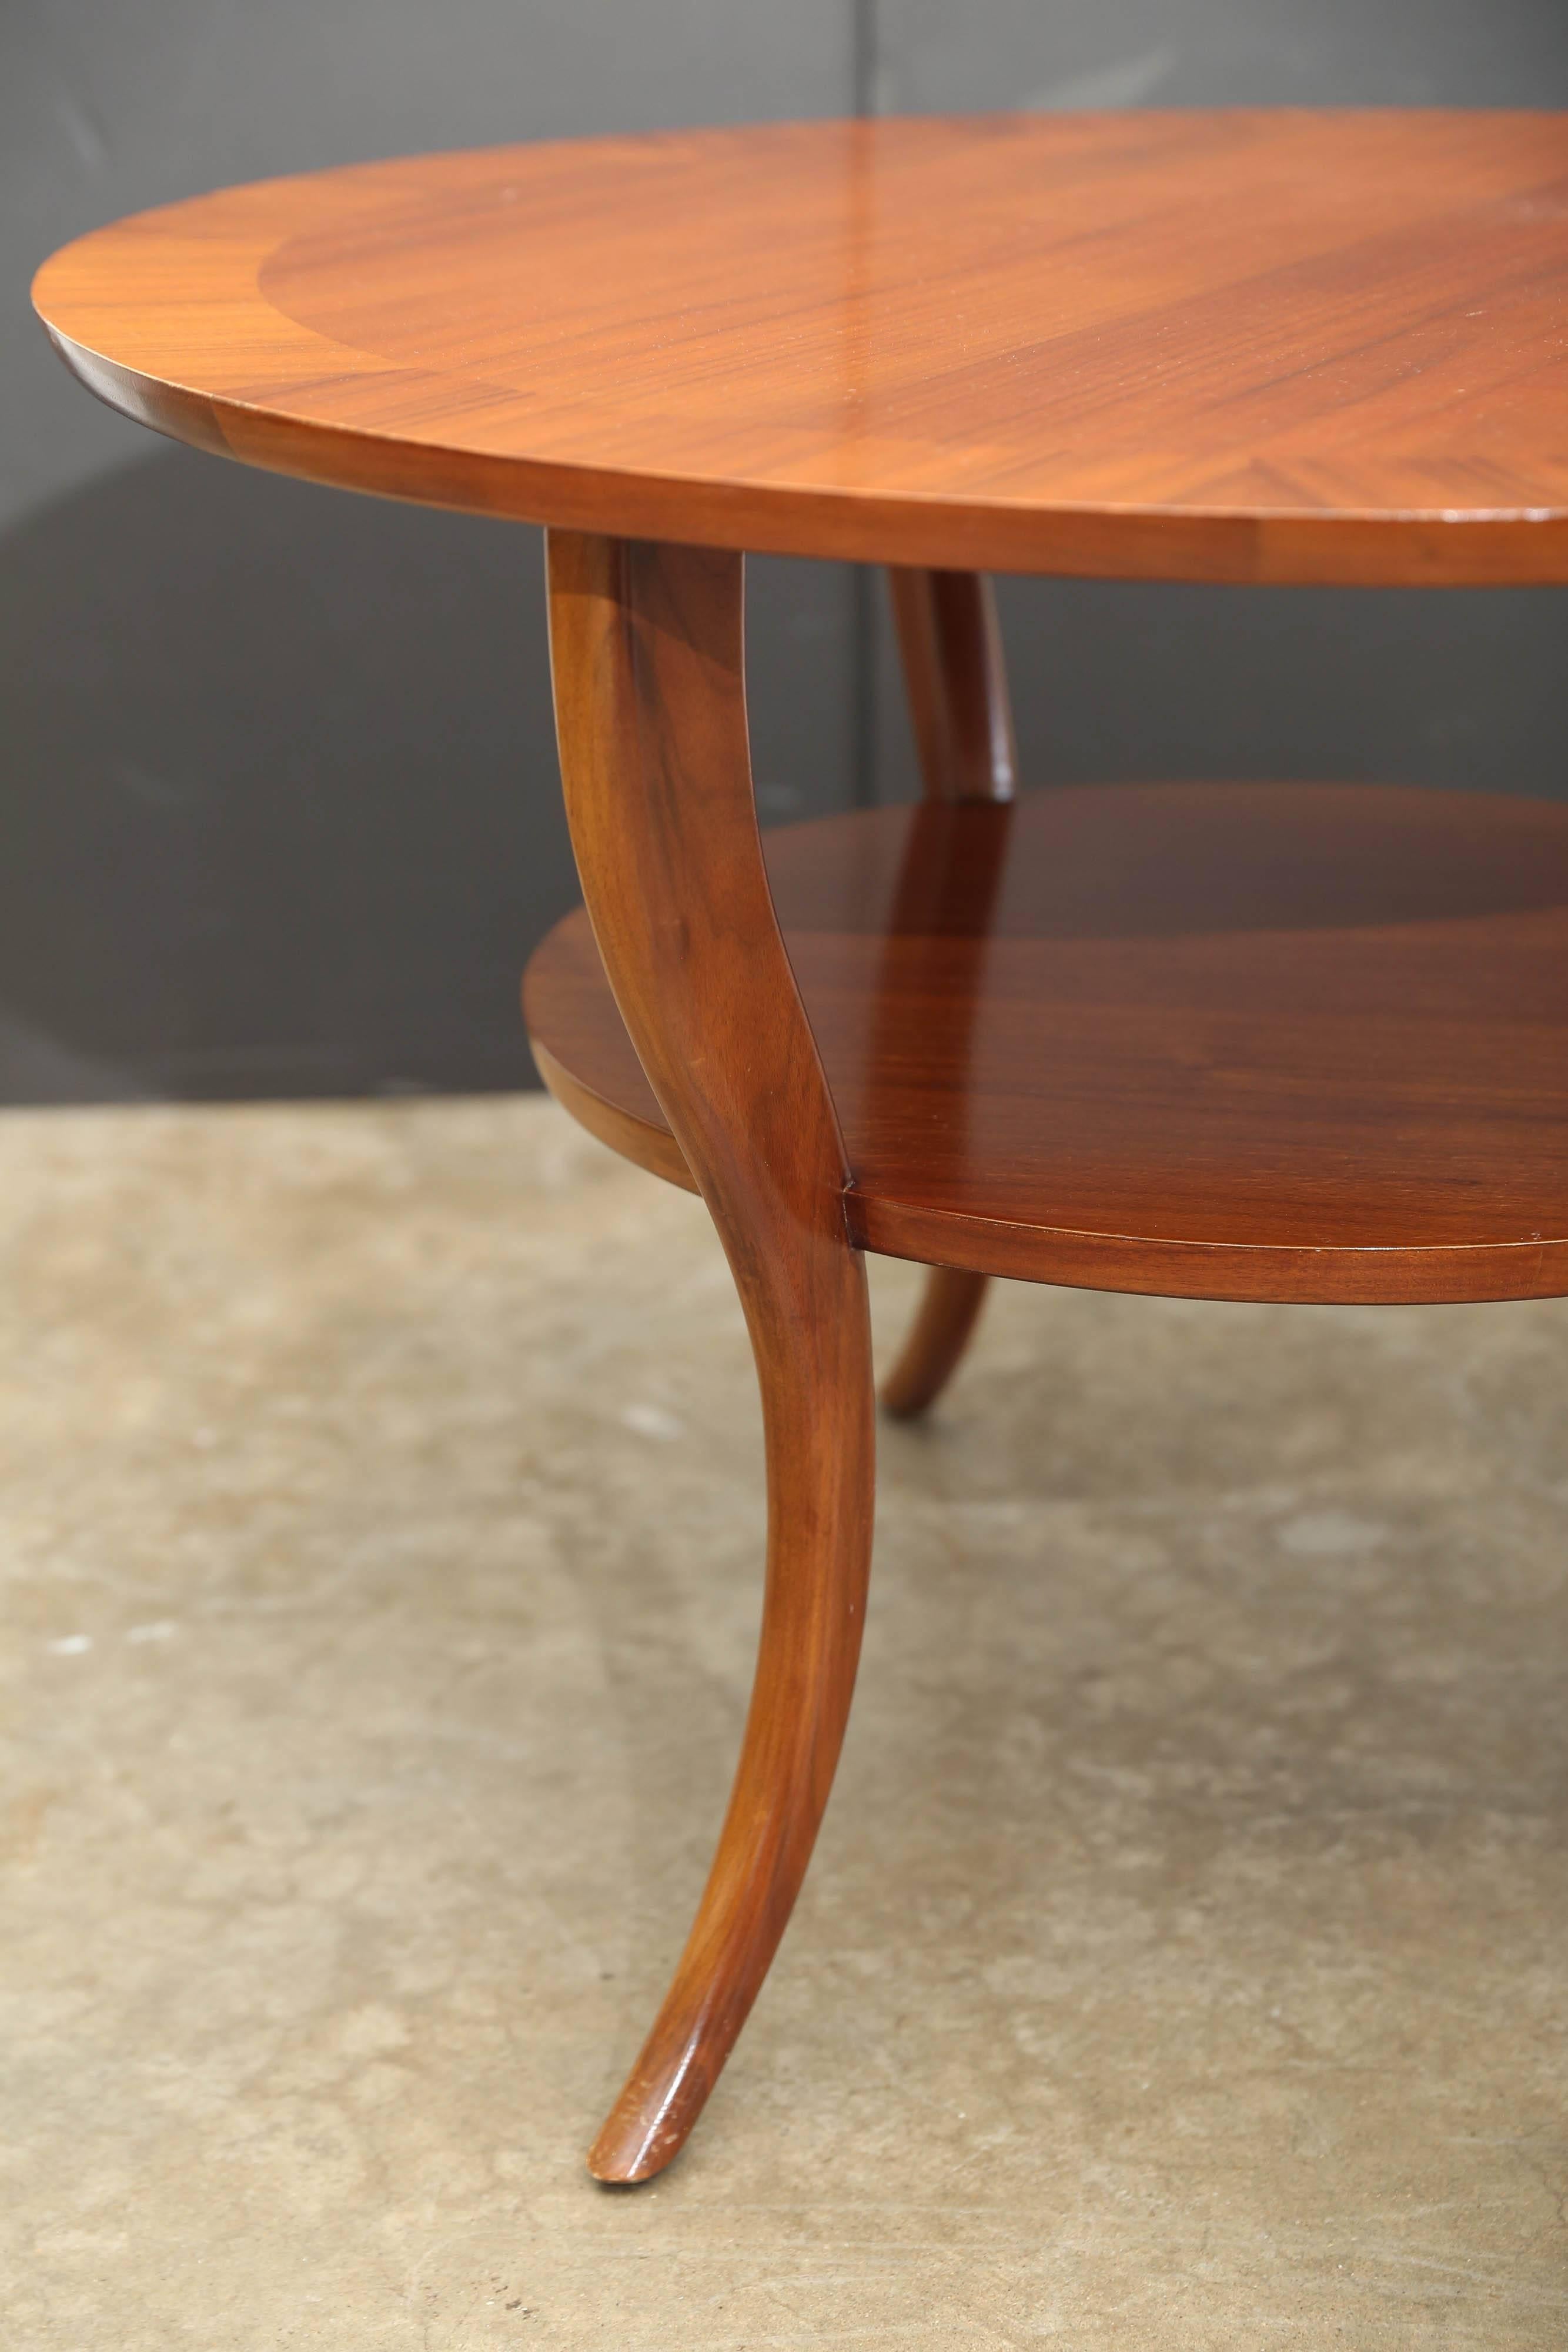 20th Century Two-Tier Walnut Saber Leg Occasional Table by Robsjohn-Gibbings for Widdicomb